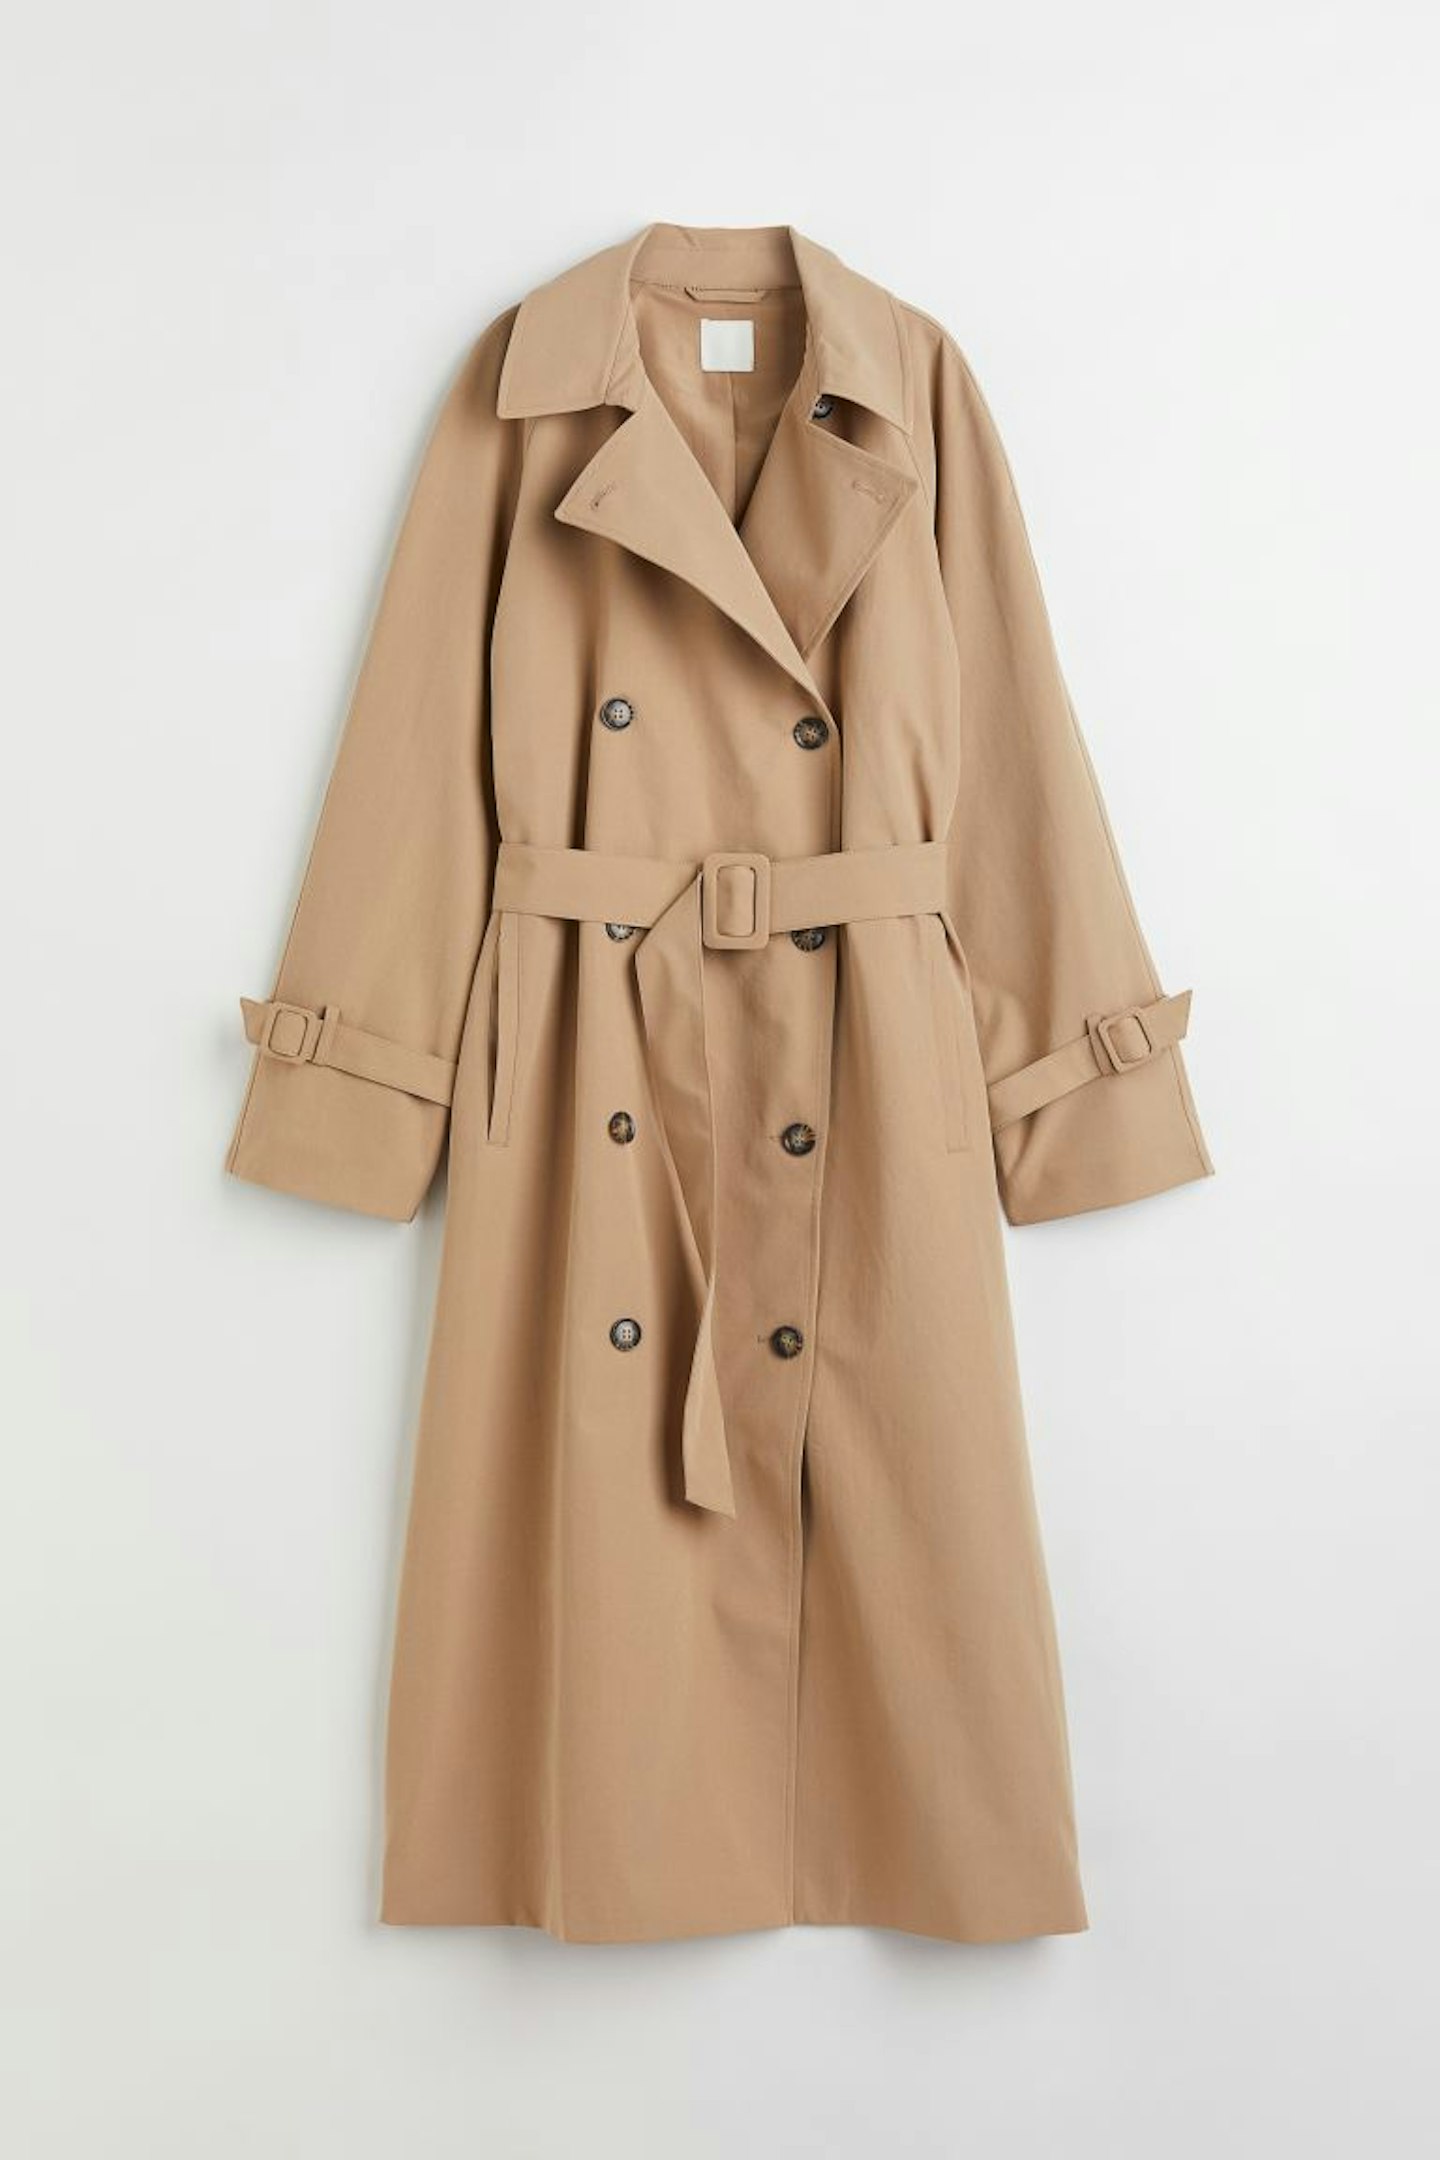 best trench coats for women H&M, Beige Belted Trench Coat, £39.99